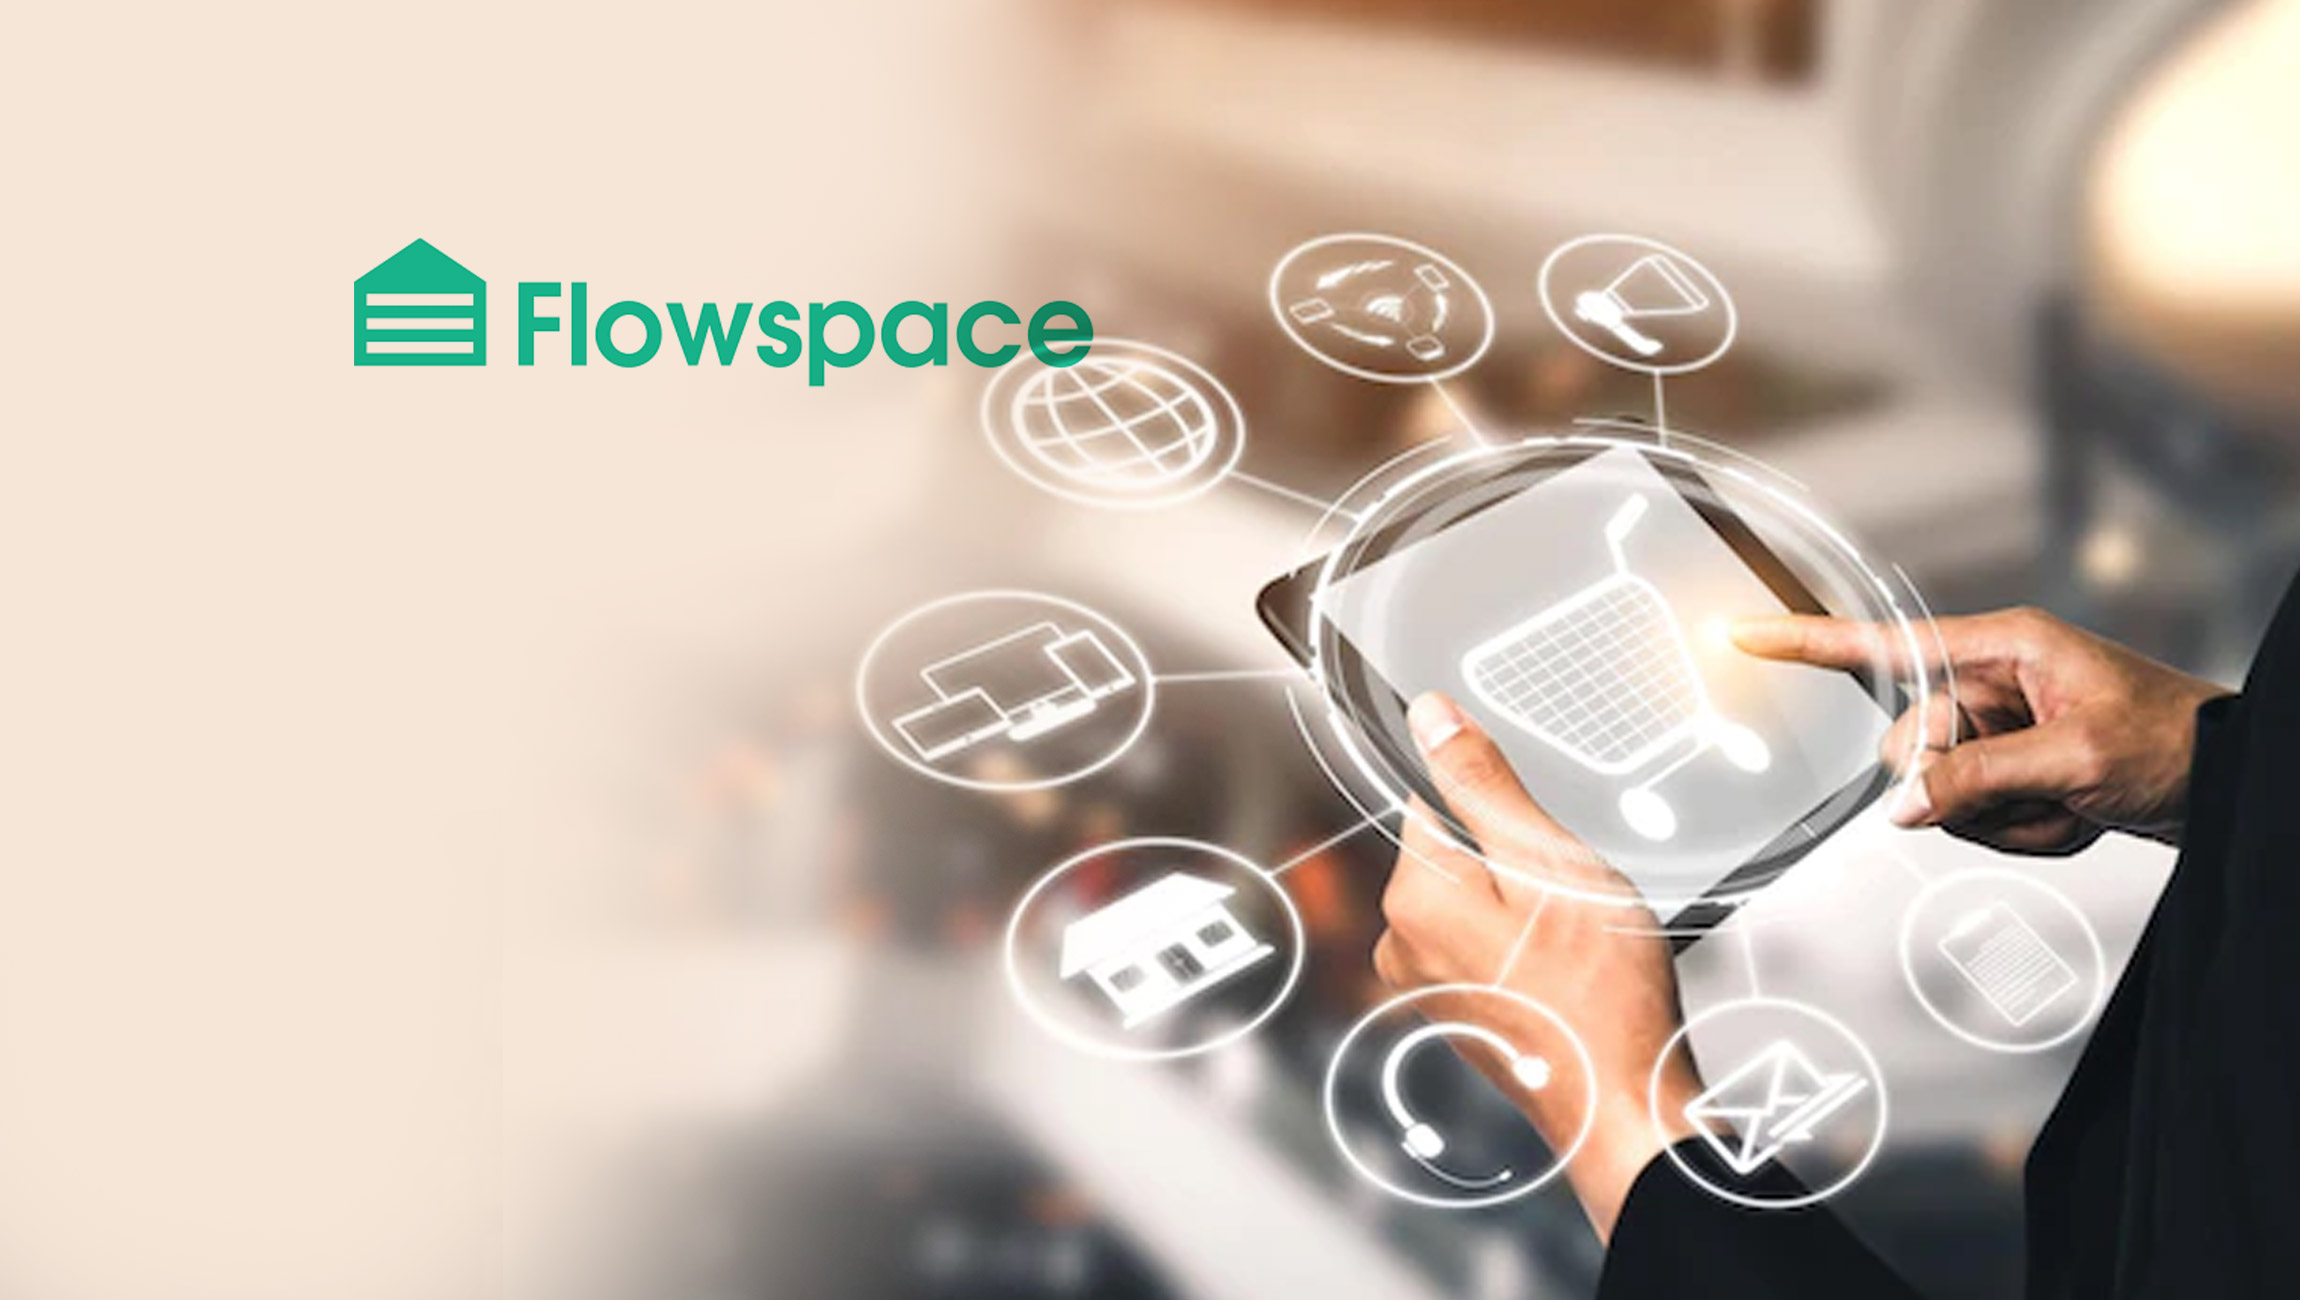 Flowspace Powers Brands in DTC and Retail with OmniFlow Visibility Suite